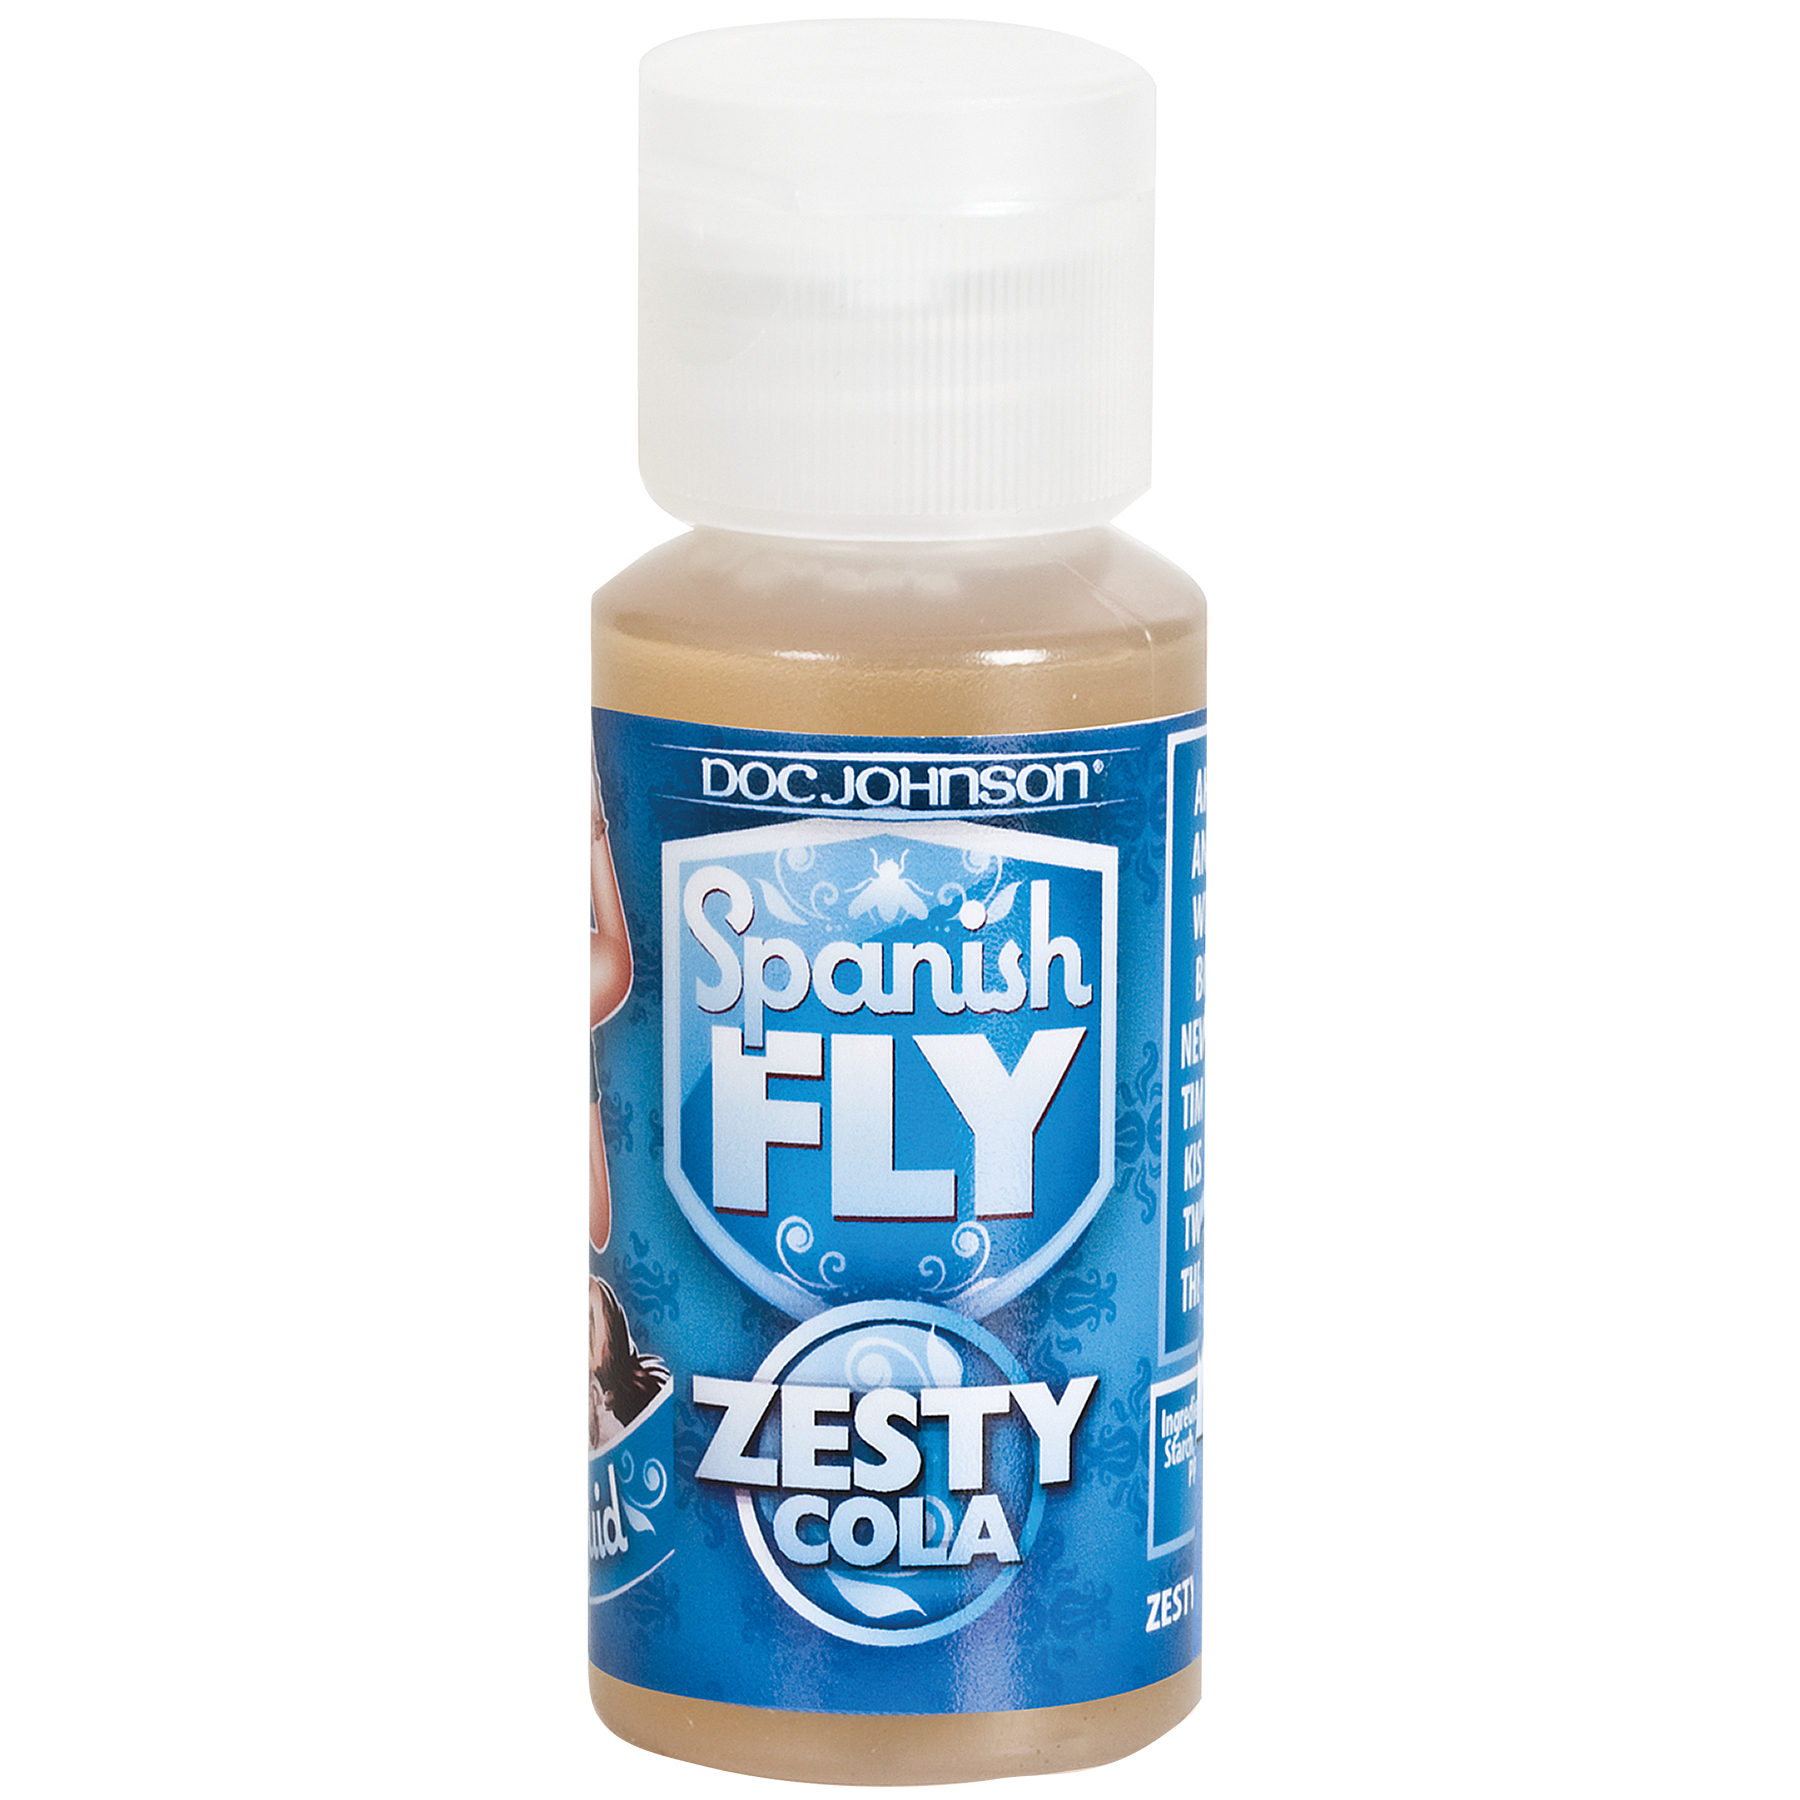 For decades, people have believed that Spanish Fly liquid brings out sexual energ...